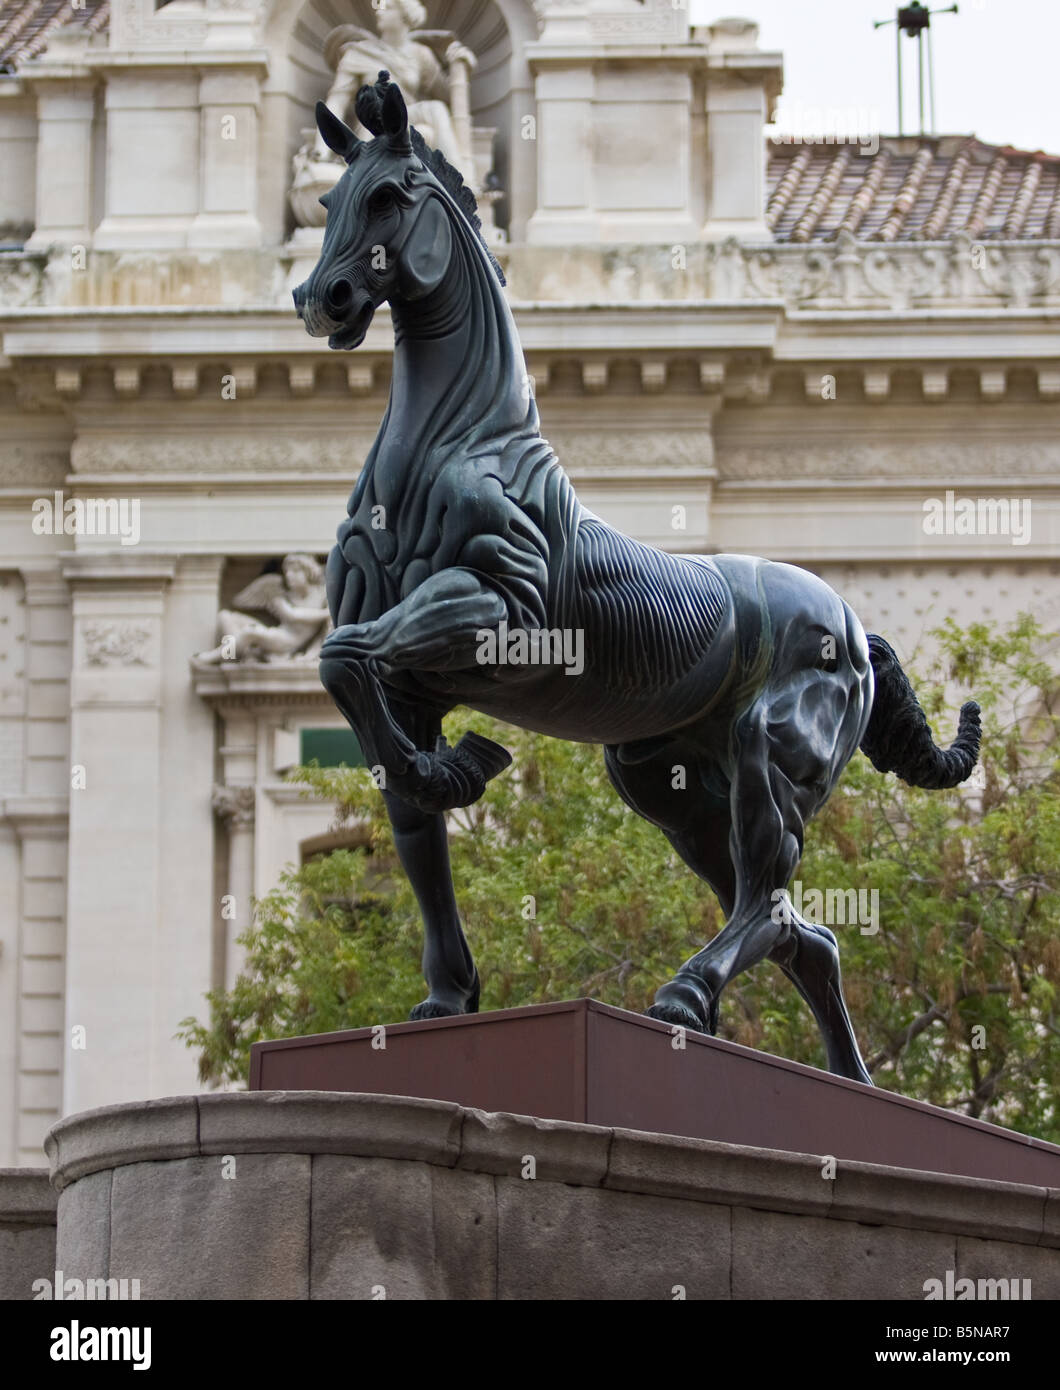 Statue of a horse Stock Photo